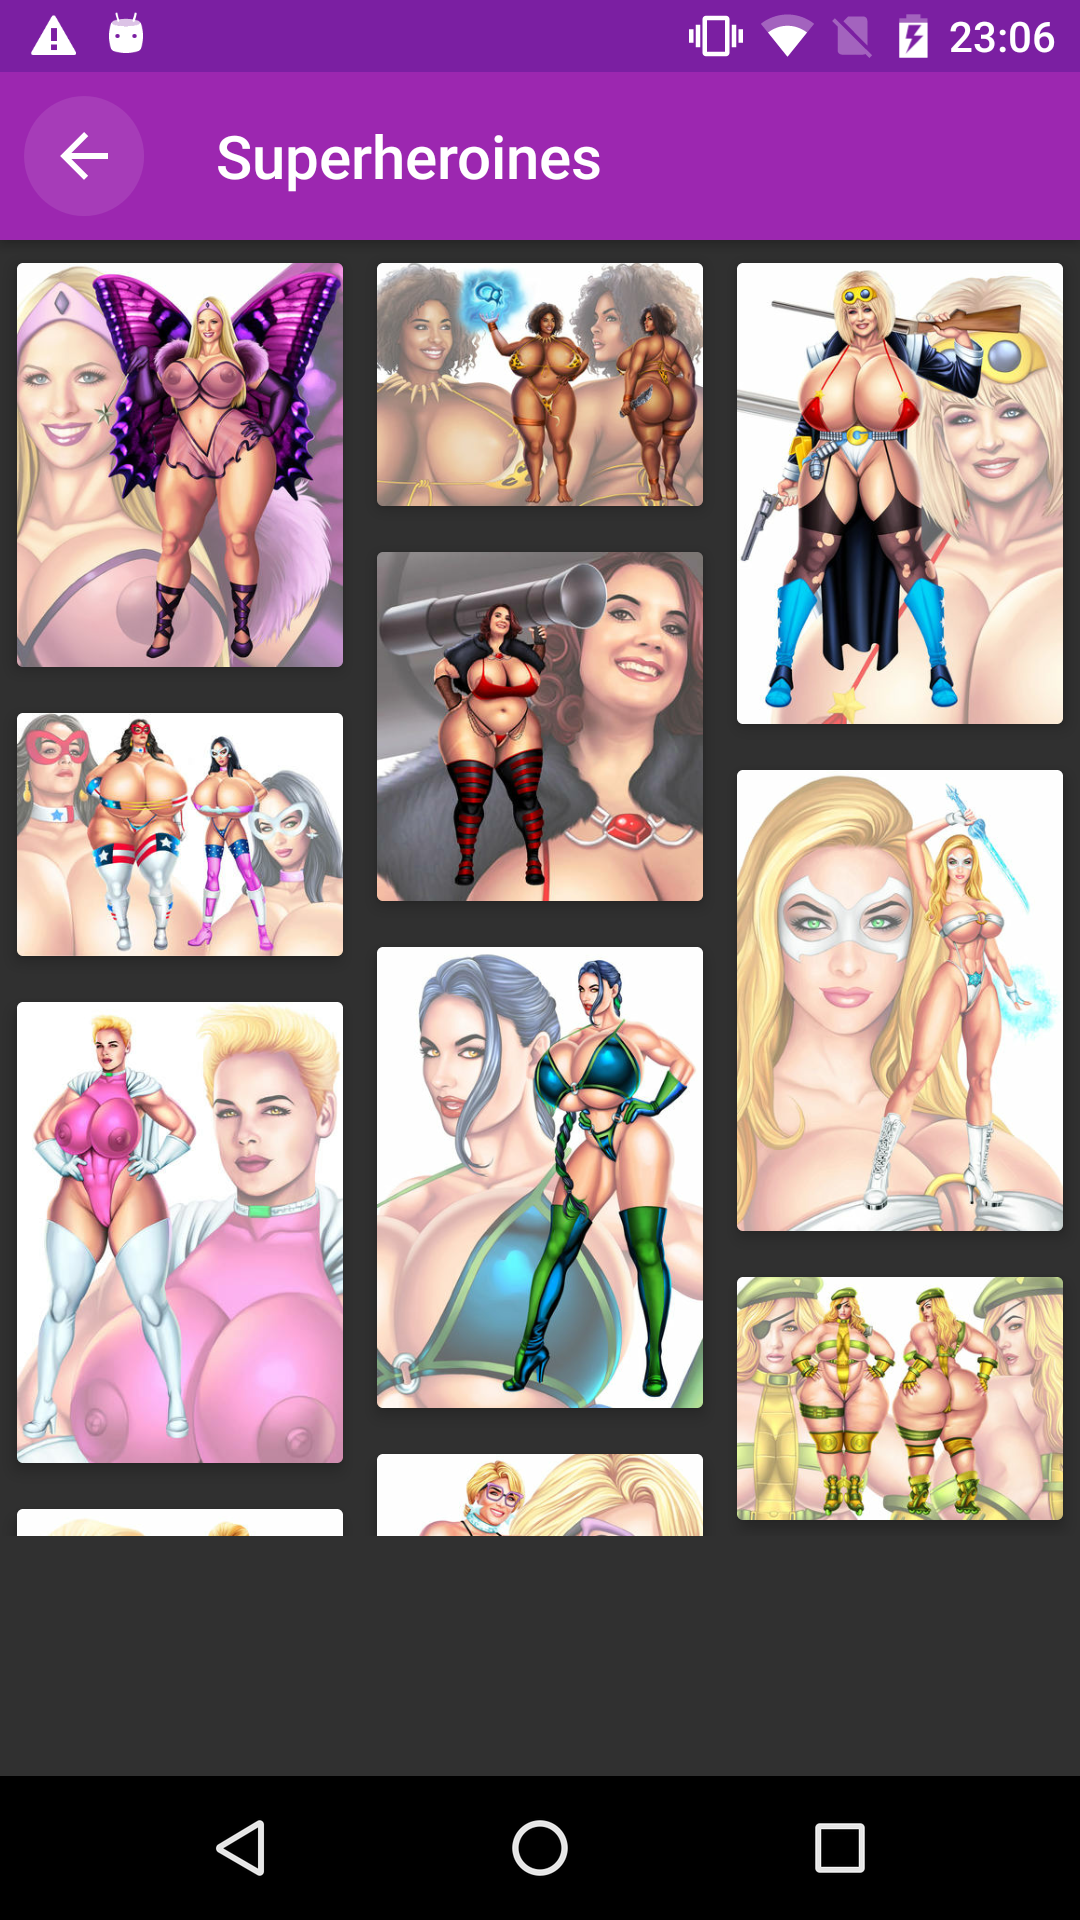 Superheroines downloading,pictures,apps,apk,edit,android,free,sex,galleries,hot,porn,collection,hintai,nude,photo,for,app,superheroines,hentai,pornstar,pics,sexy,comics,pegging